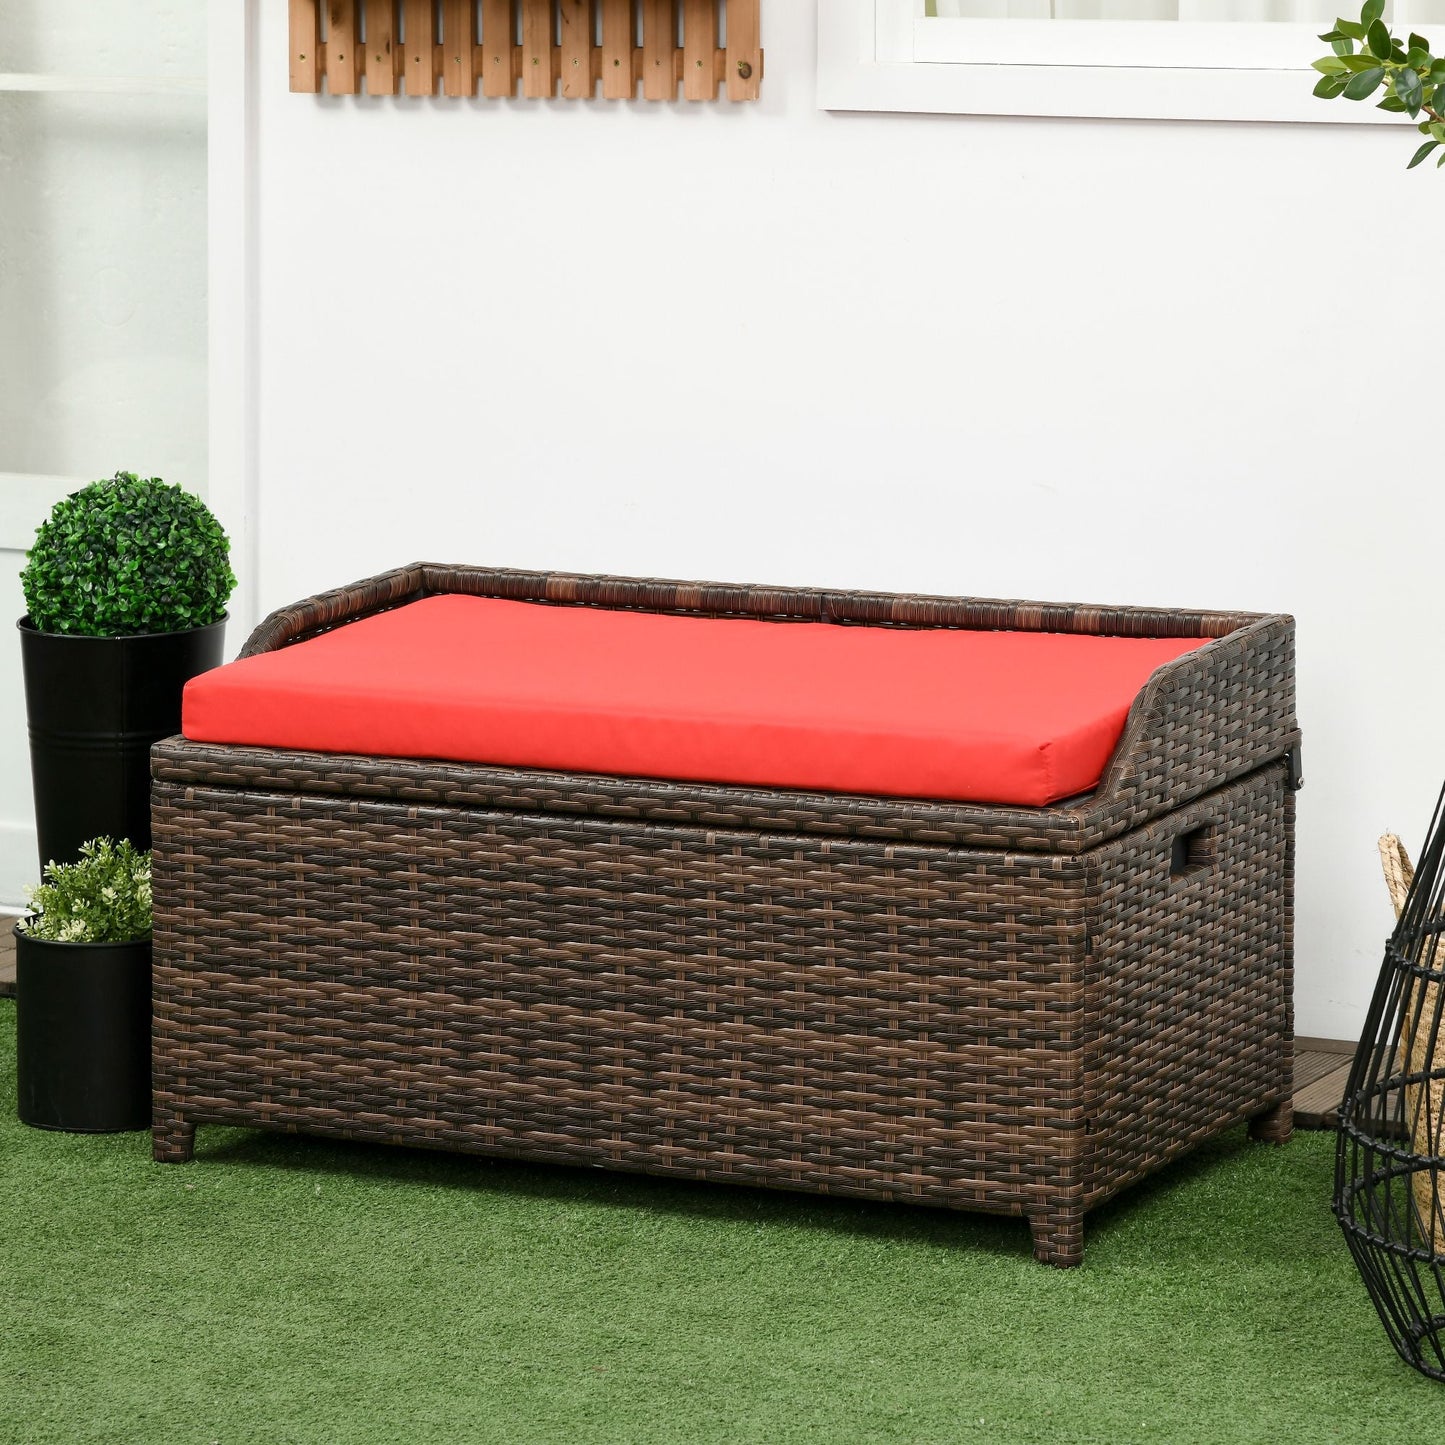 Outdoor and Garden-Patio Wicker Storage Bench, Cushioned Outdoor PE Rattan Patio Furniture, Air Strut Assisted Easy Open, 2-In-1 Seat Box with Handles Seat - Brown - Outdoor Style Company